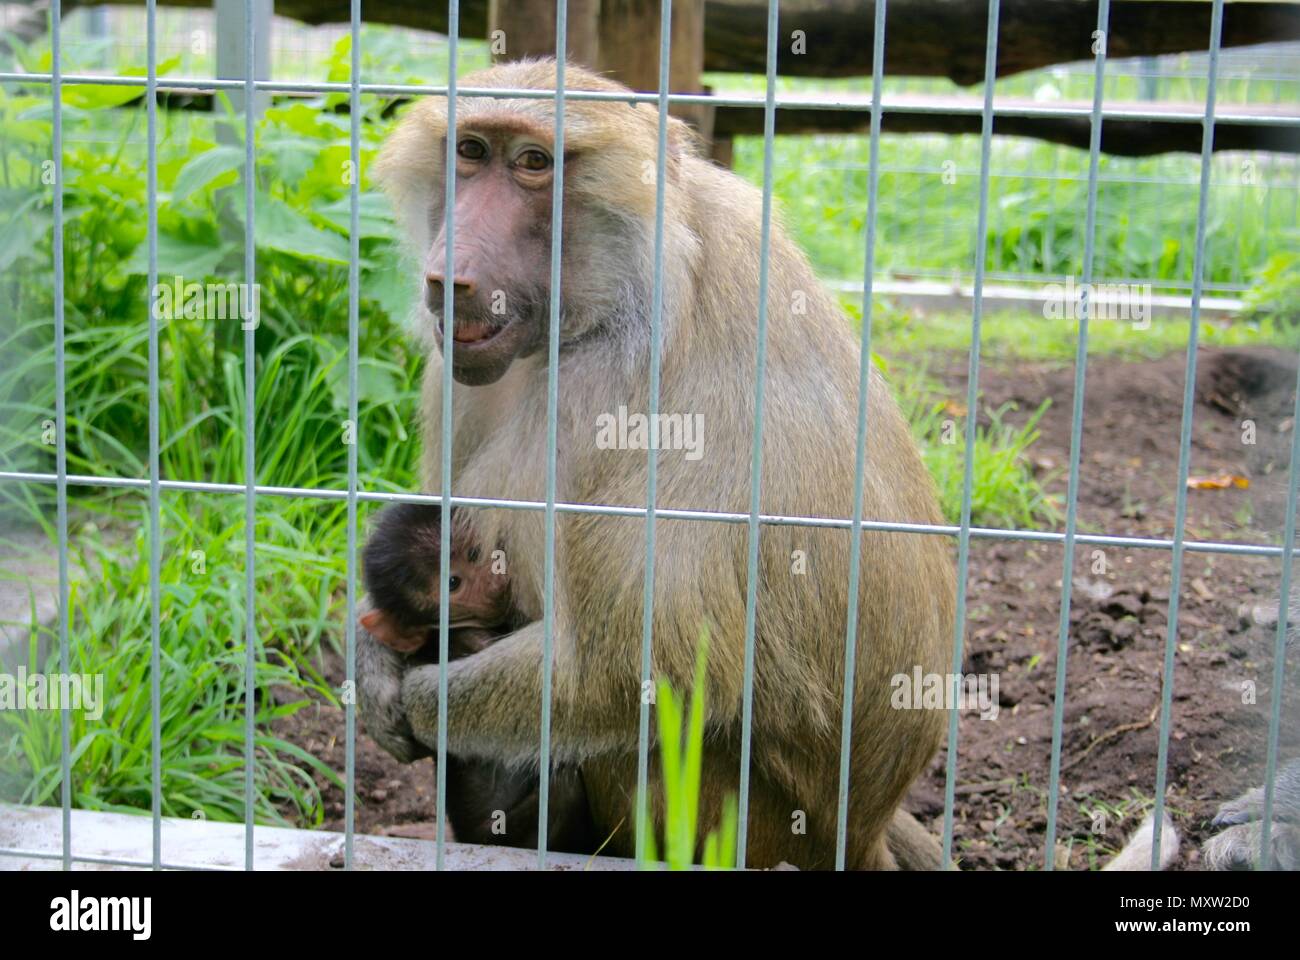 Mother of baboon hugging and feeding her son in a cage Stock Photo